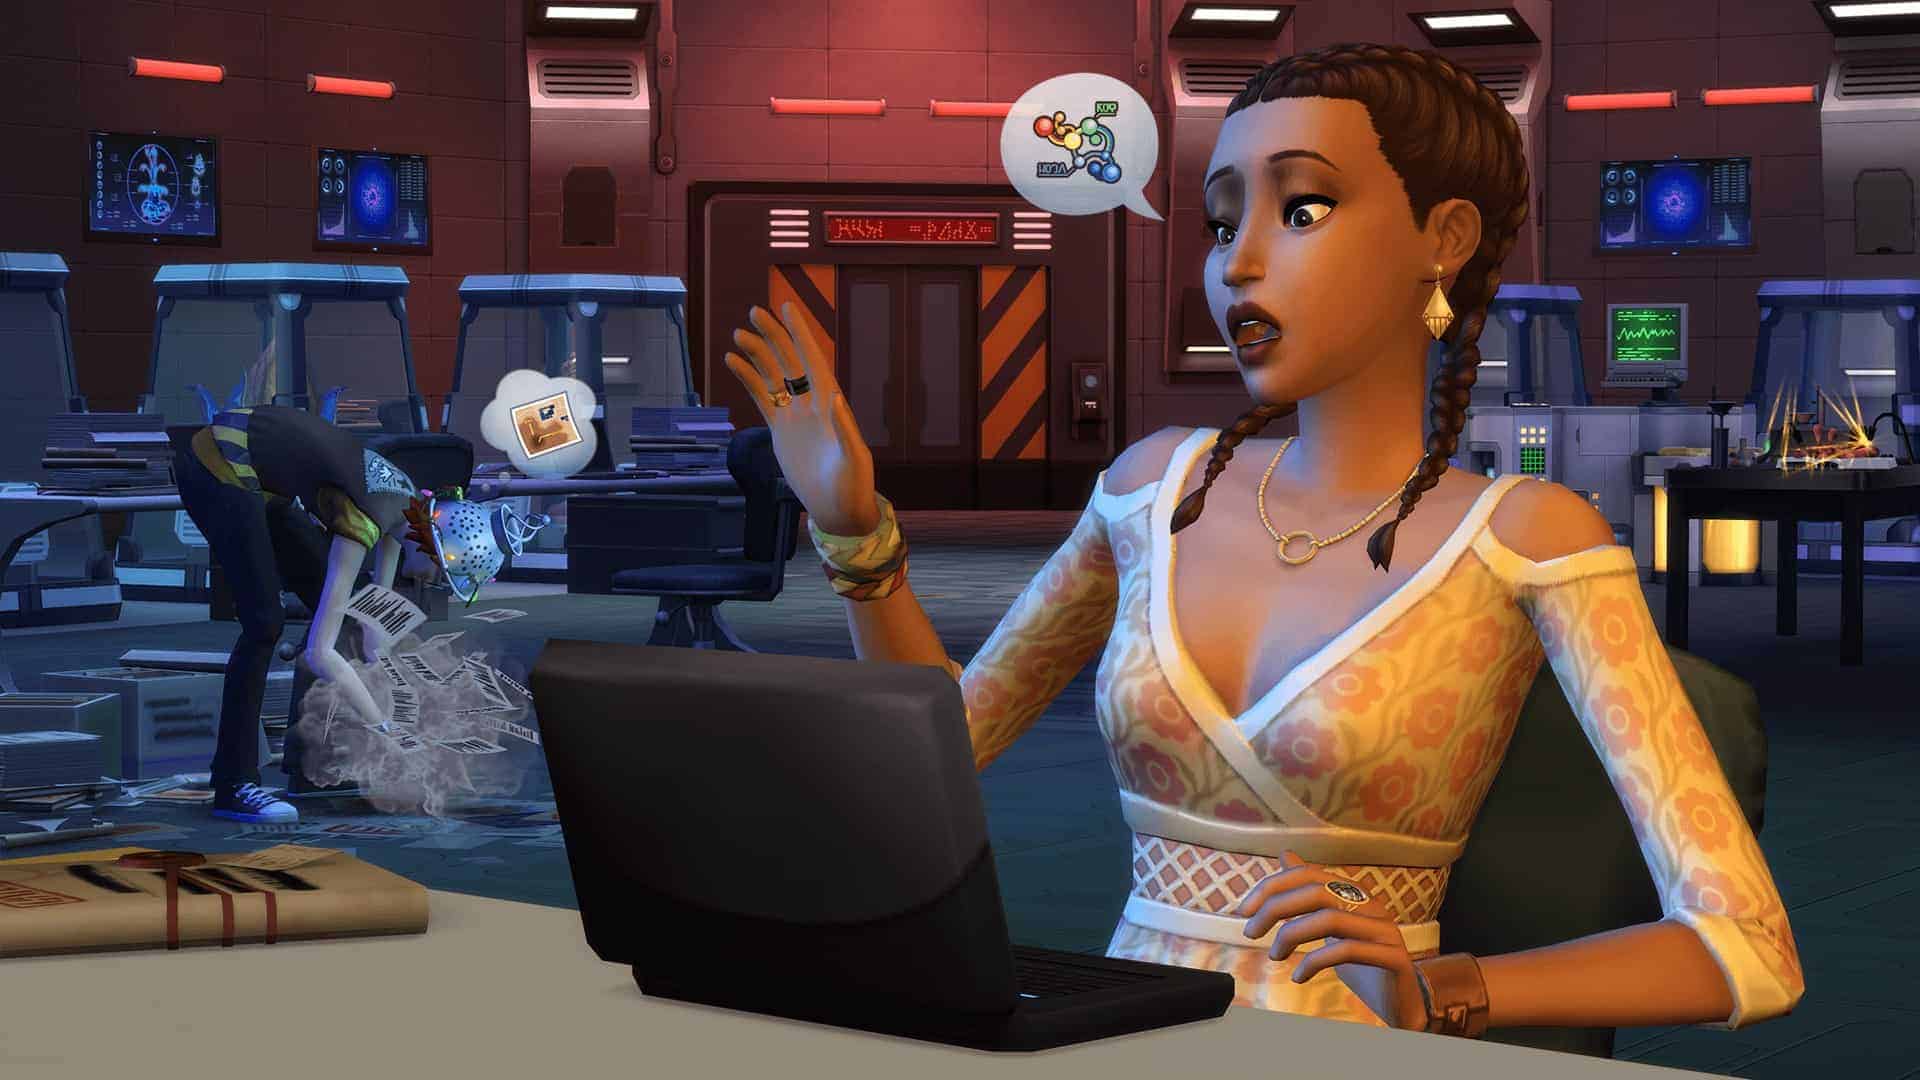 The Sims 4 StrangerVille APK Full Version Free Download